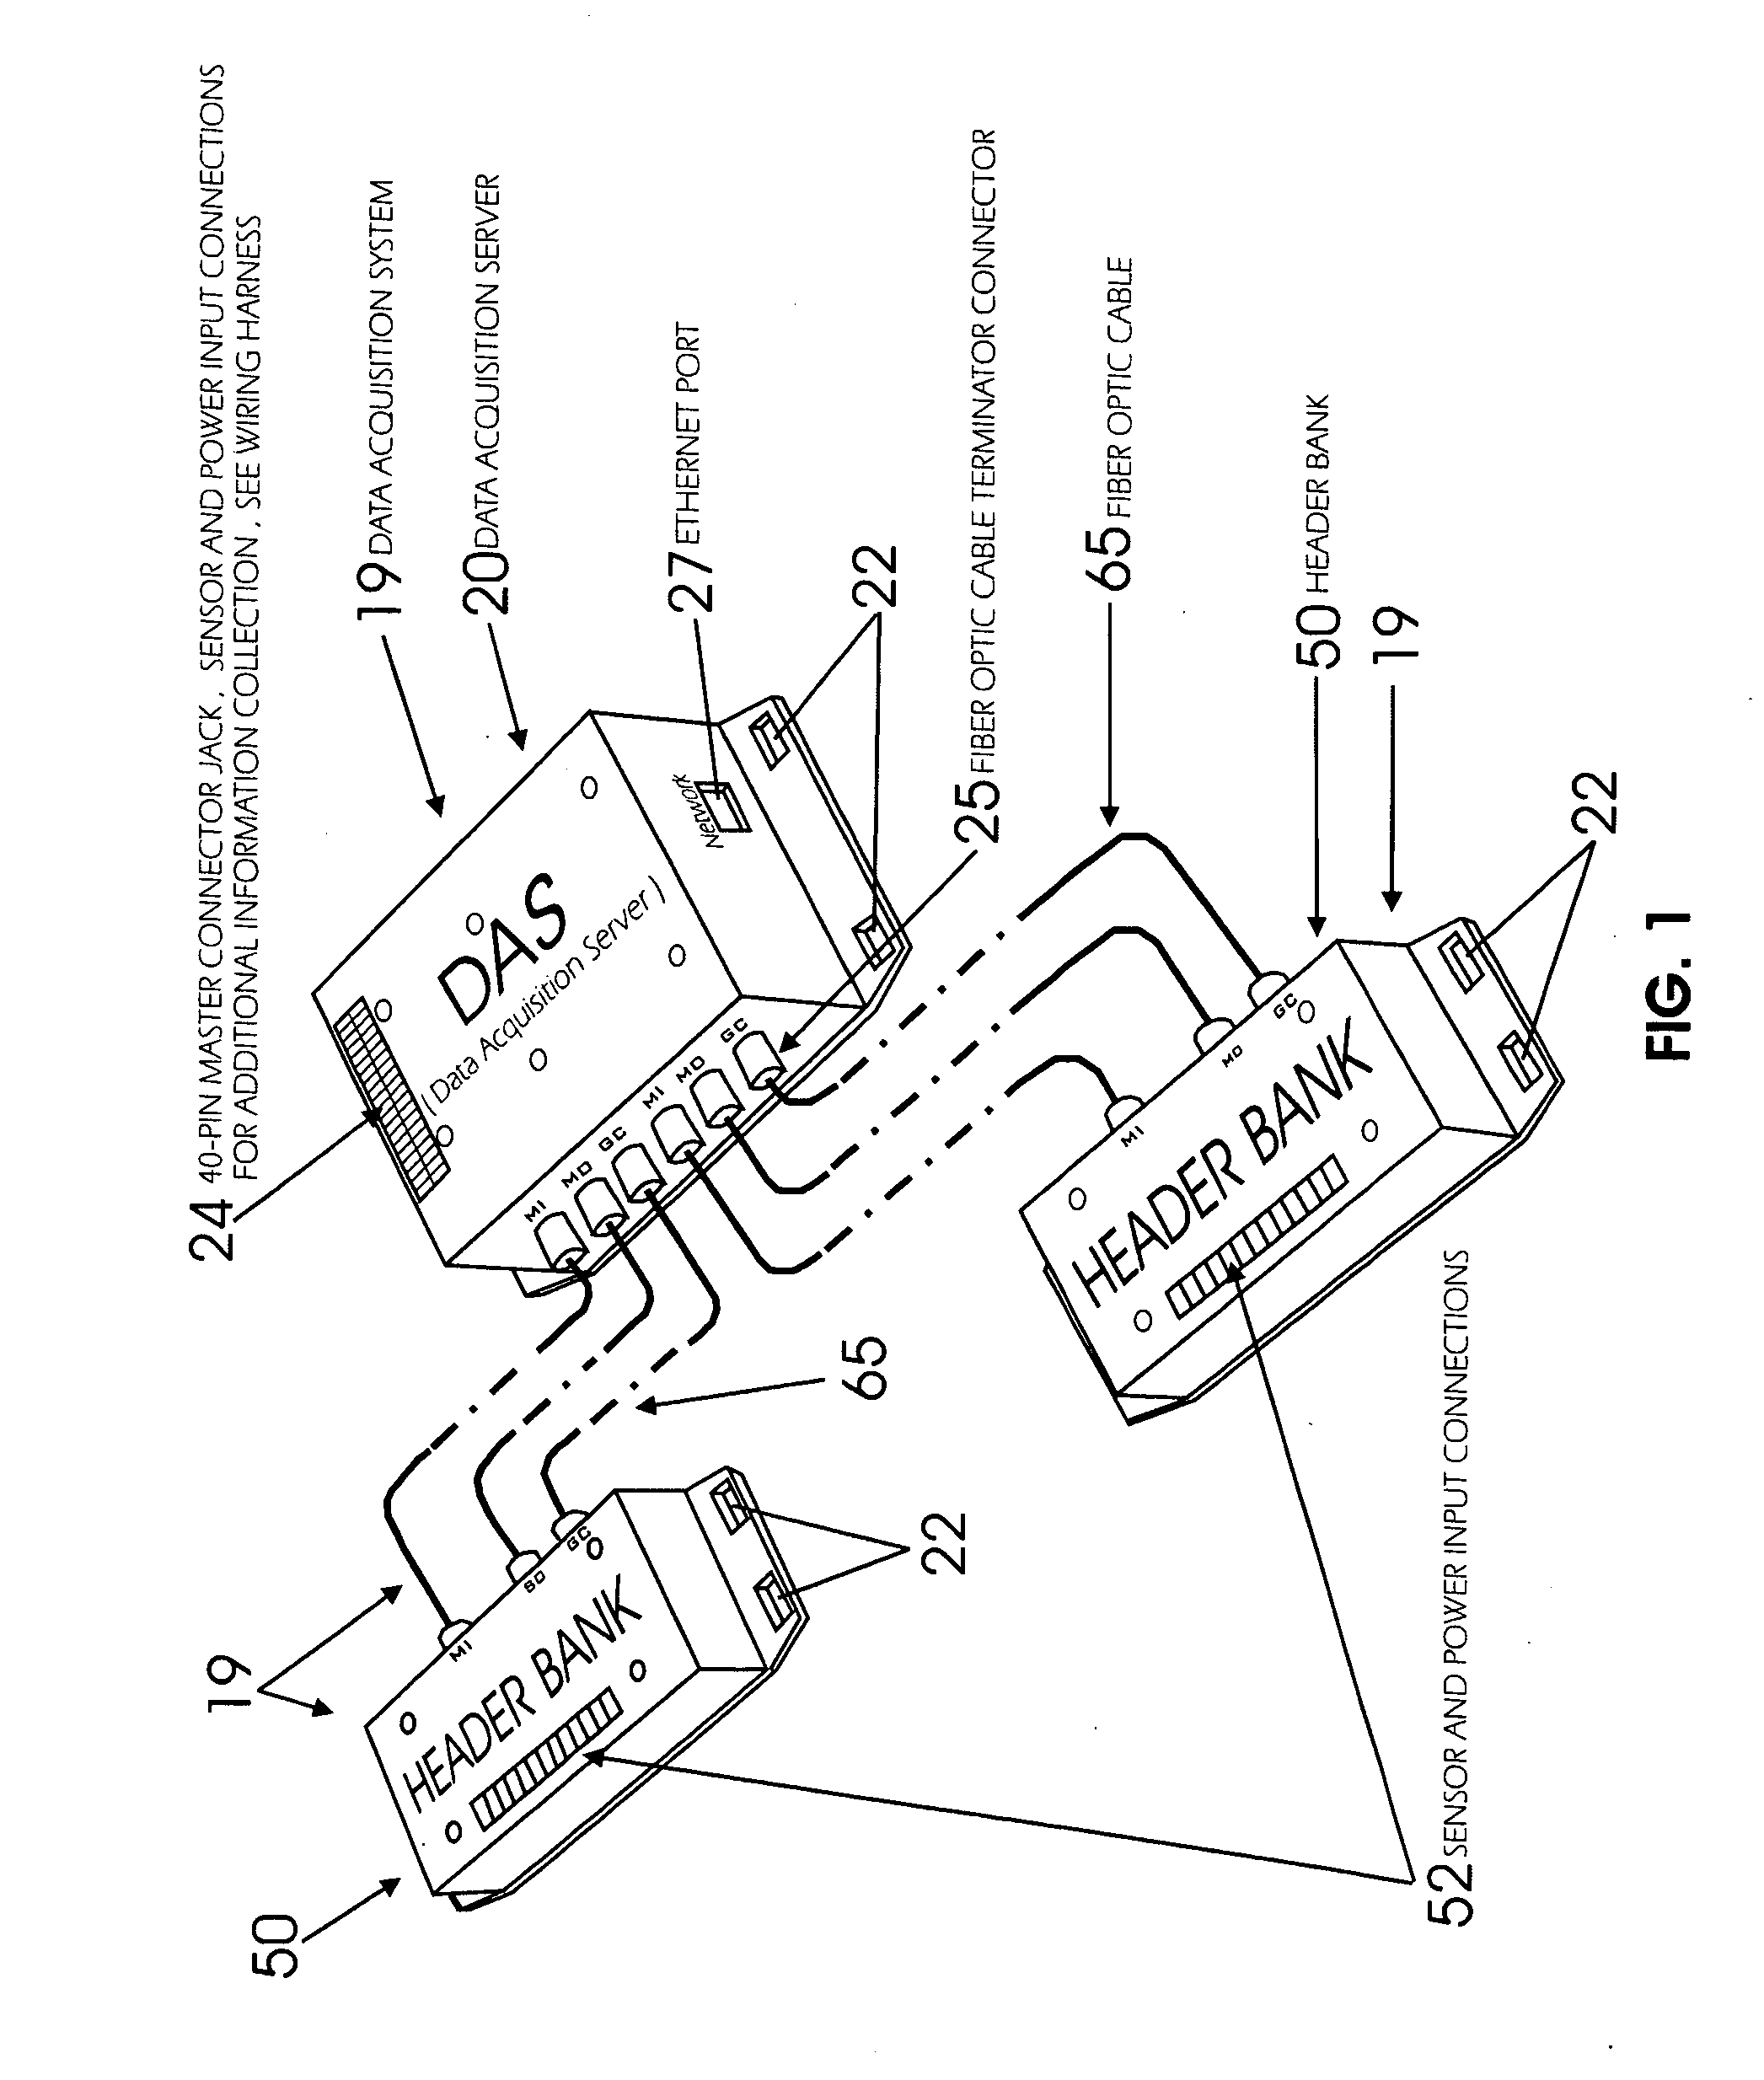 Portable, Palm-Sized Data Acquisition System for Use in Internal Combustion Engines and Industry